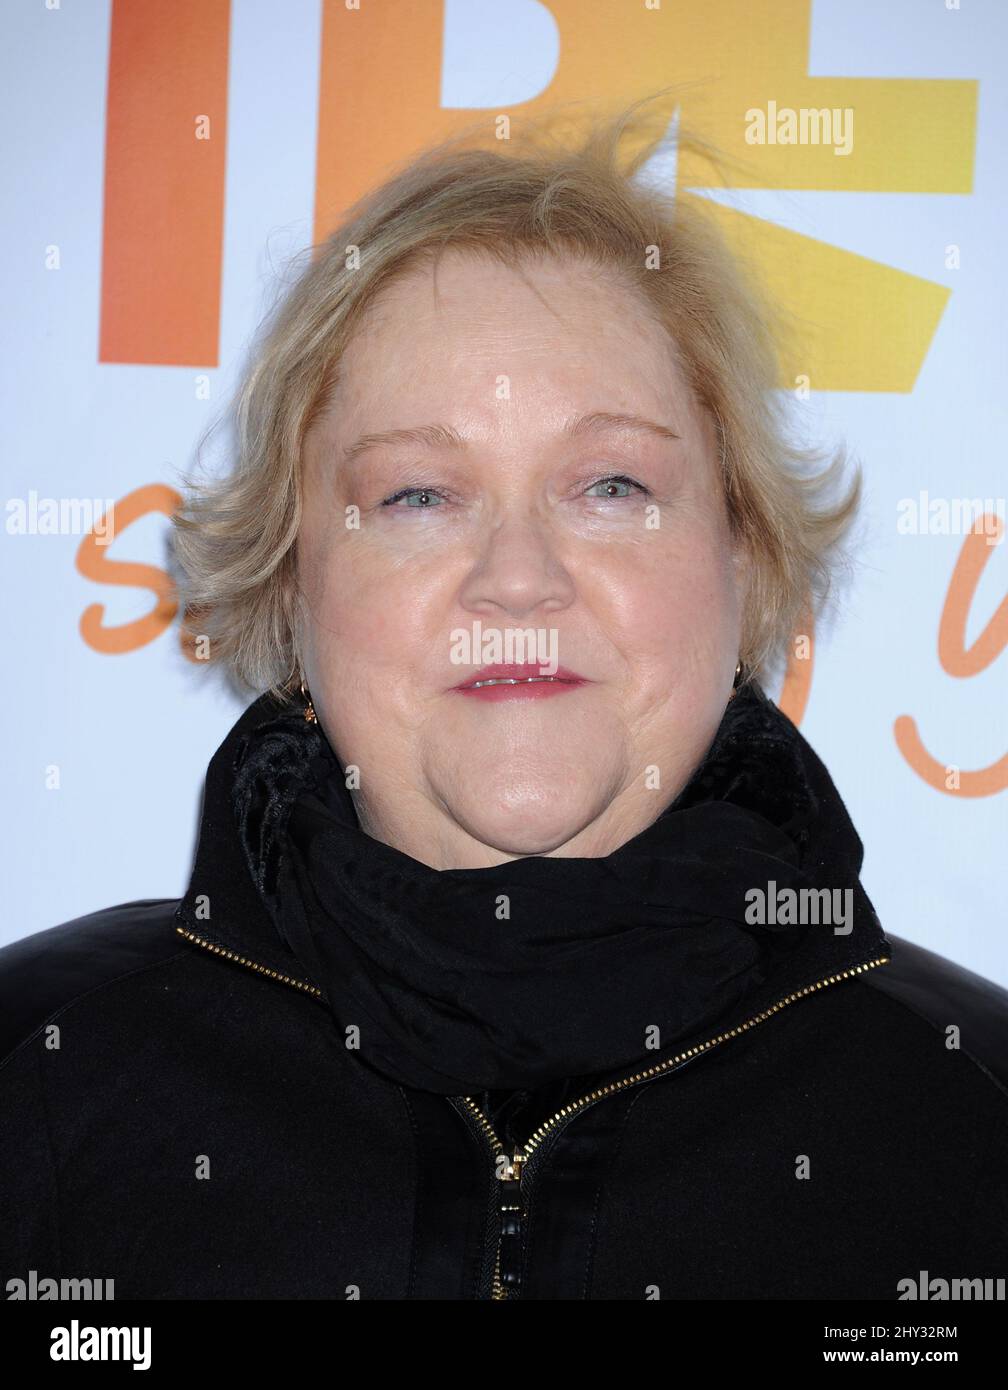 Kathy Kinney attending TrevorLive Los Angeles Benefit held at the Hollywood Pallidium in Los Angeles, USA. Stock Photo